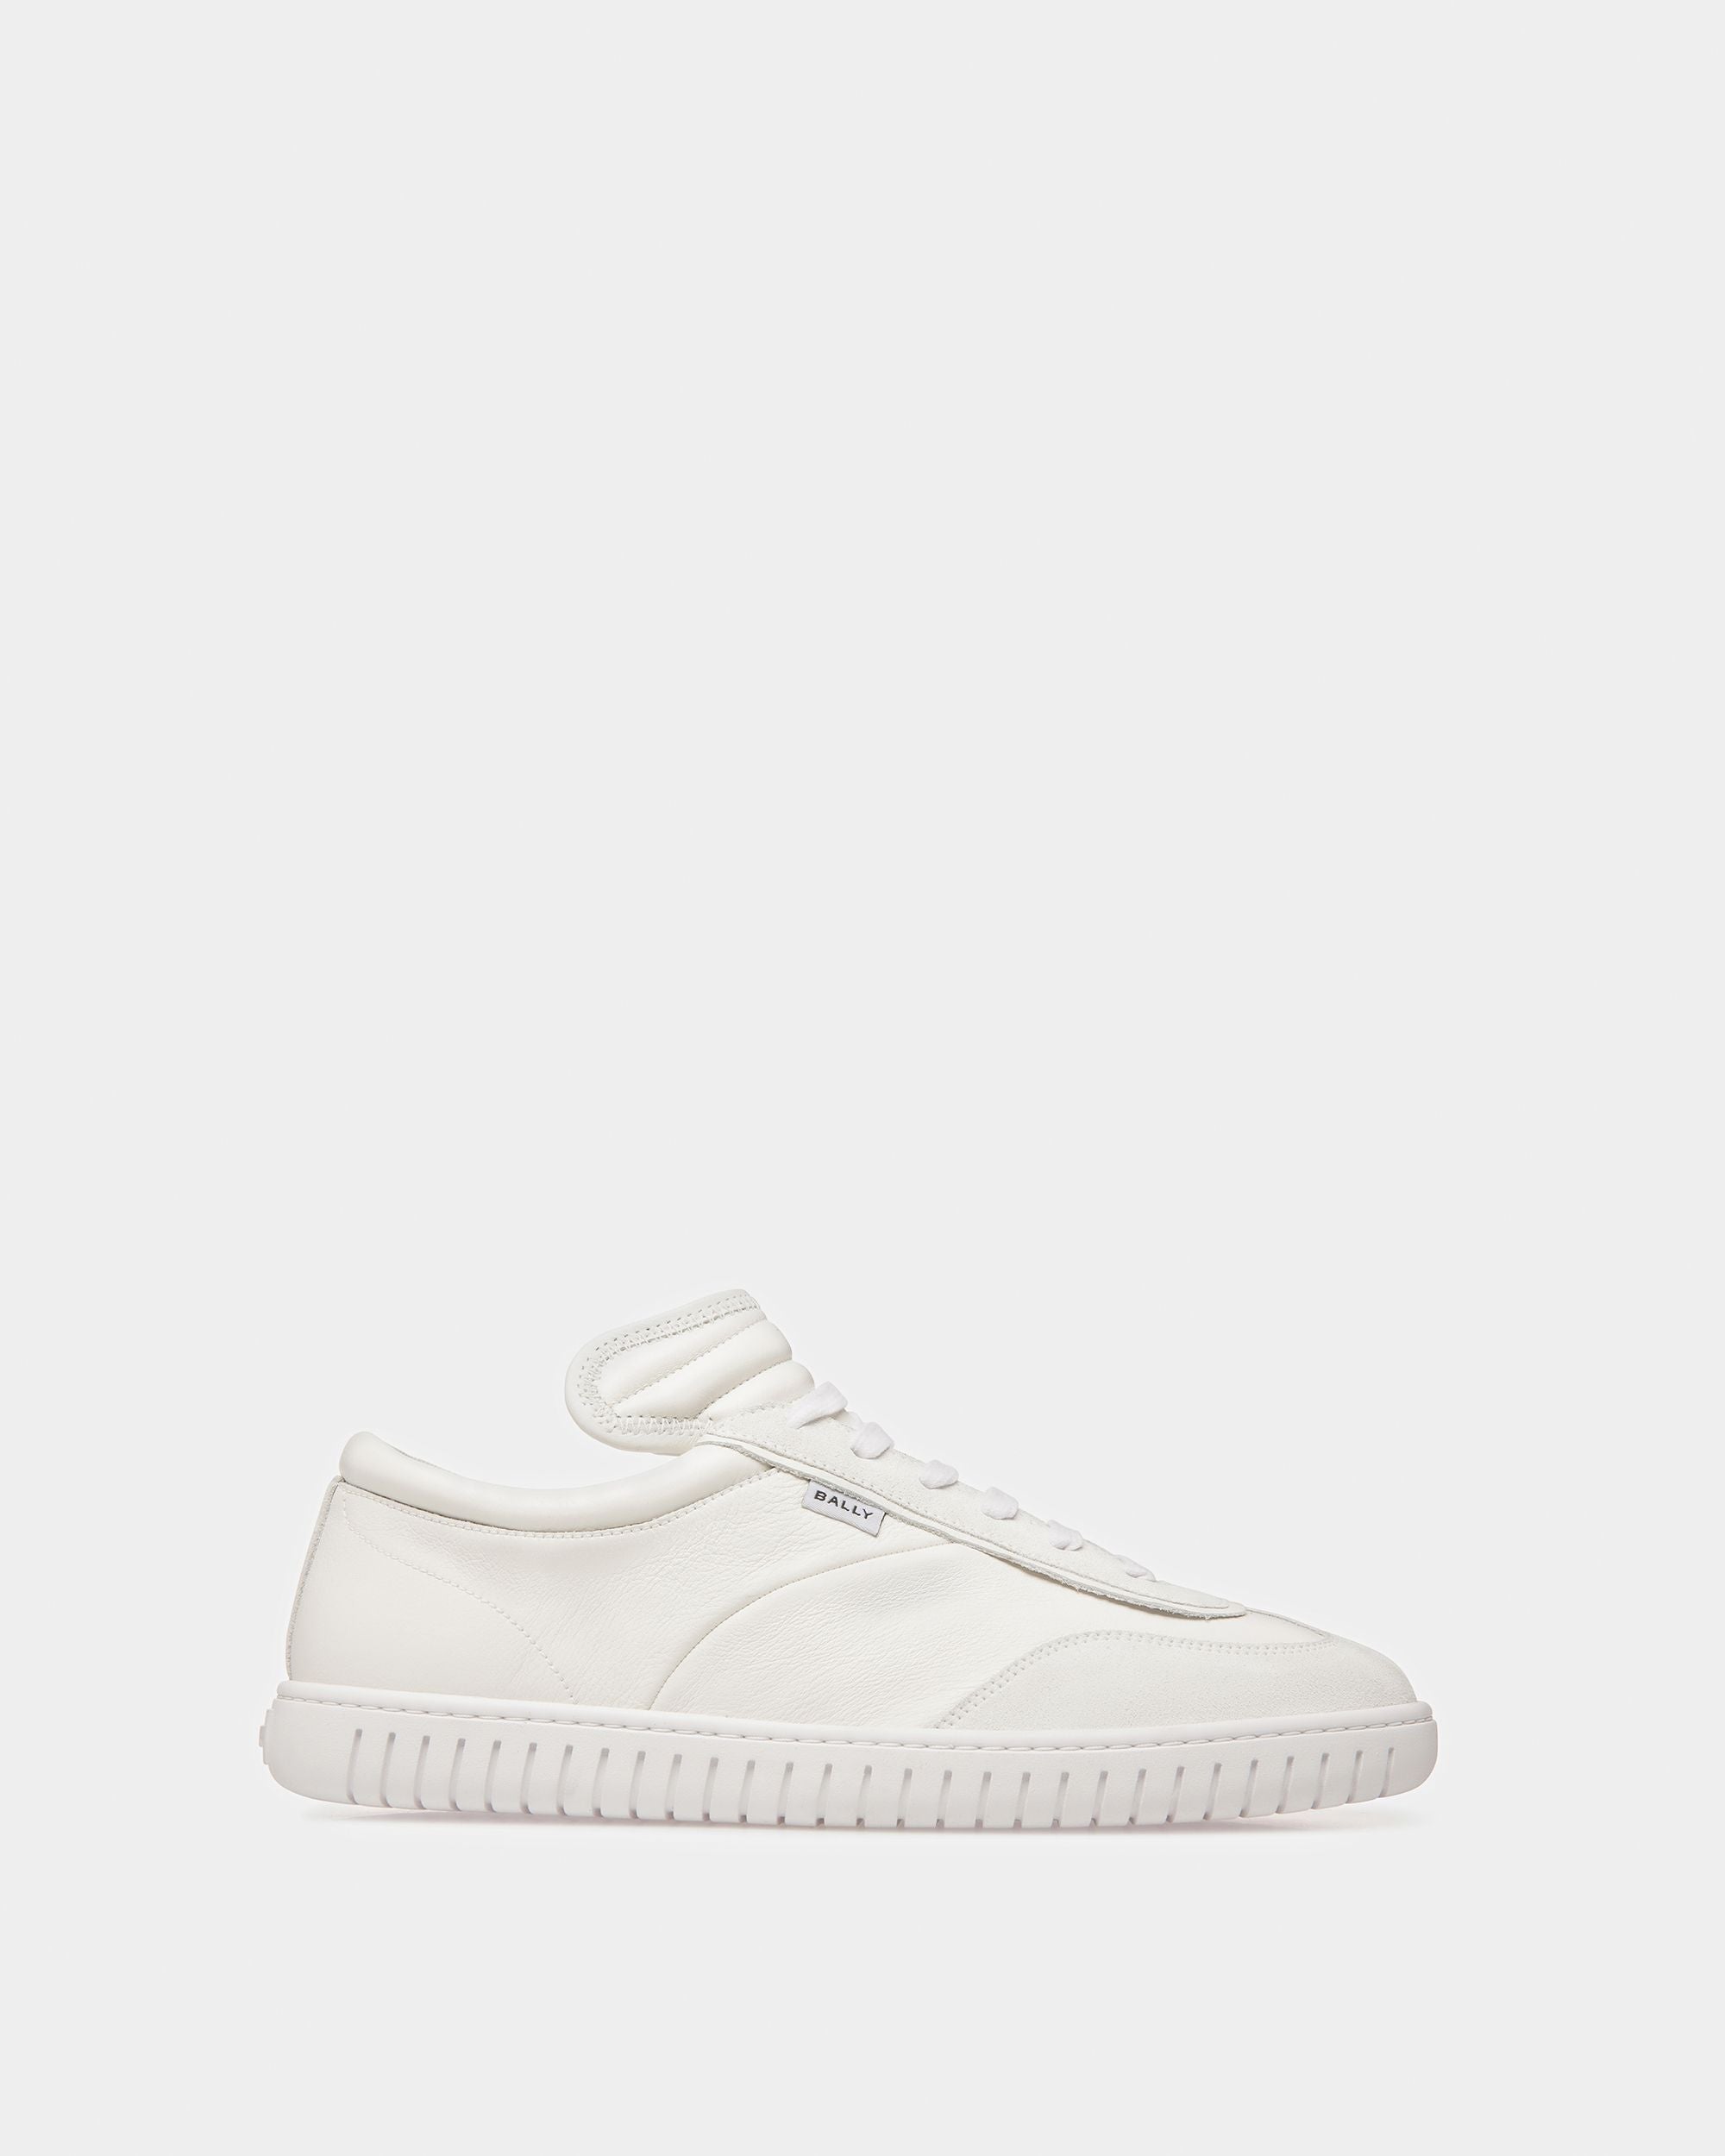 Parrel | Men's Sneakers | White Leather | Bally | Still Life Side